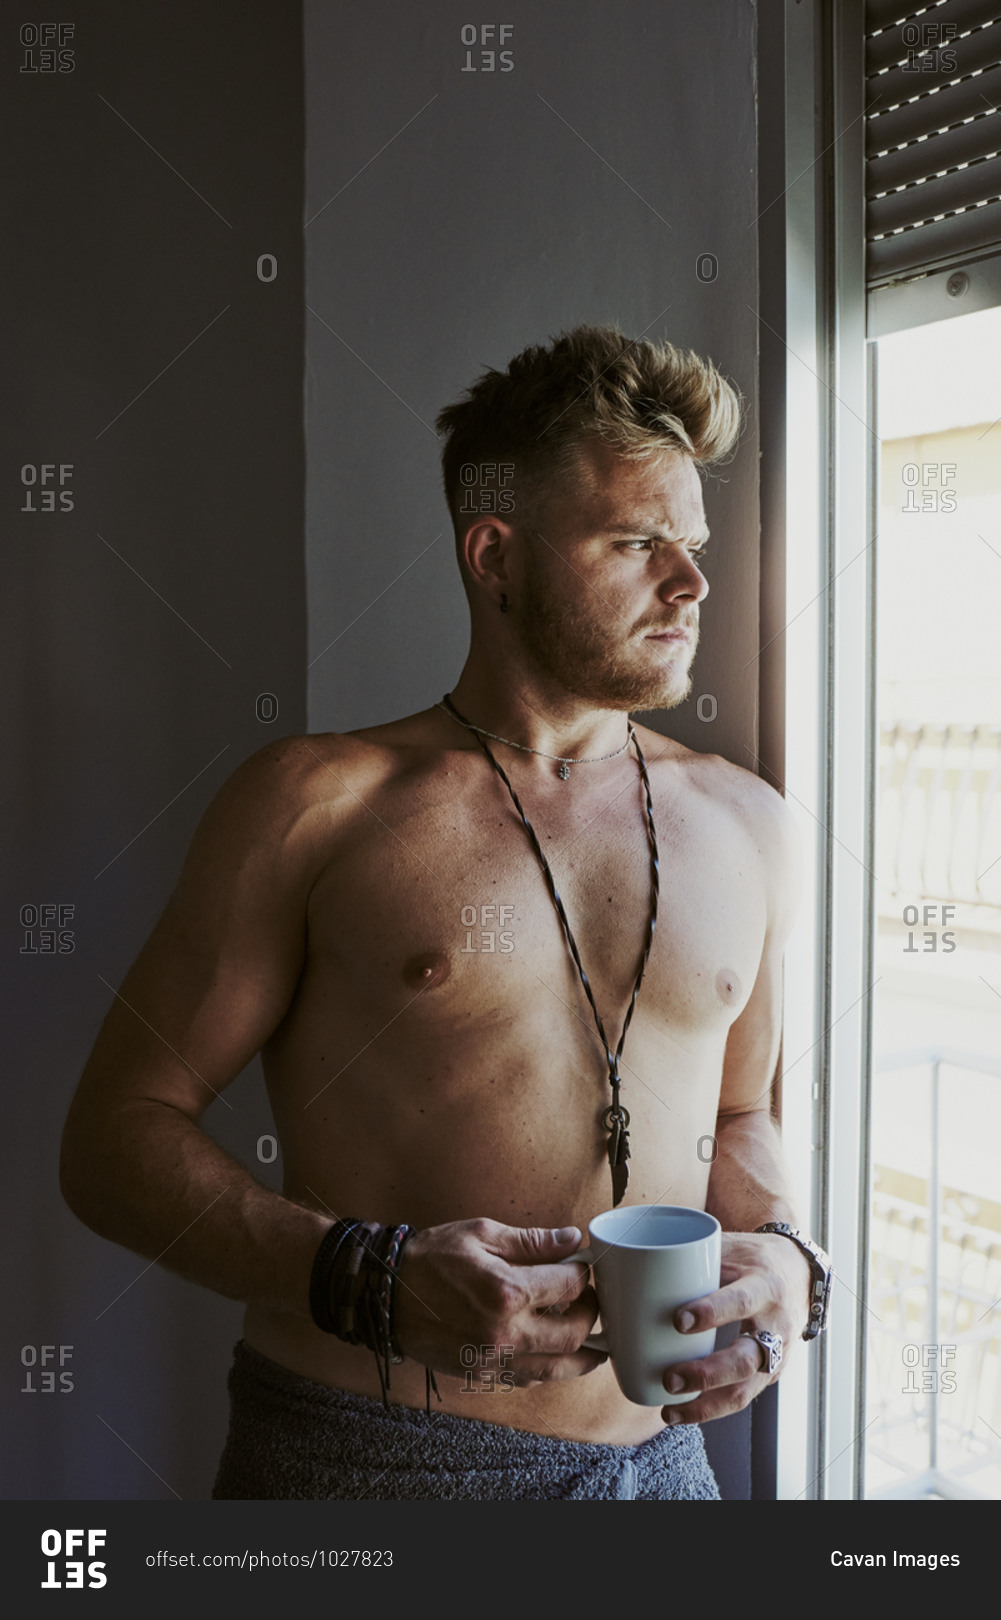 a blond man with no shirt on takes a cup of coffee while looking out the window